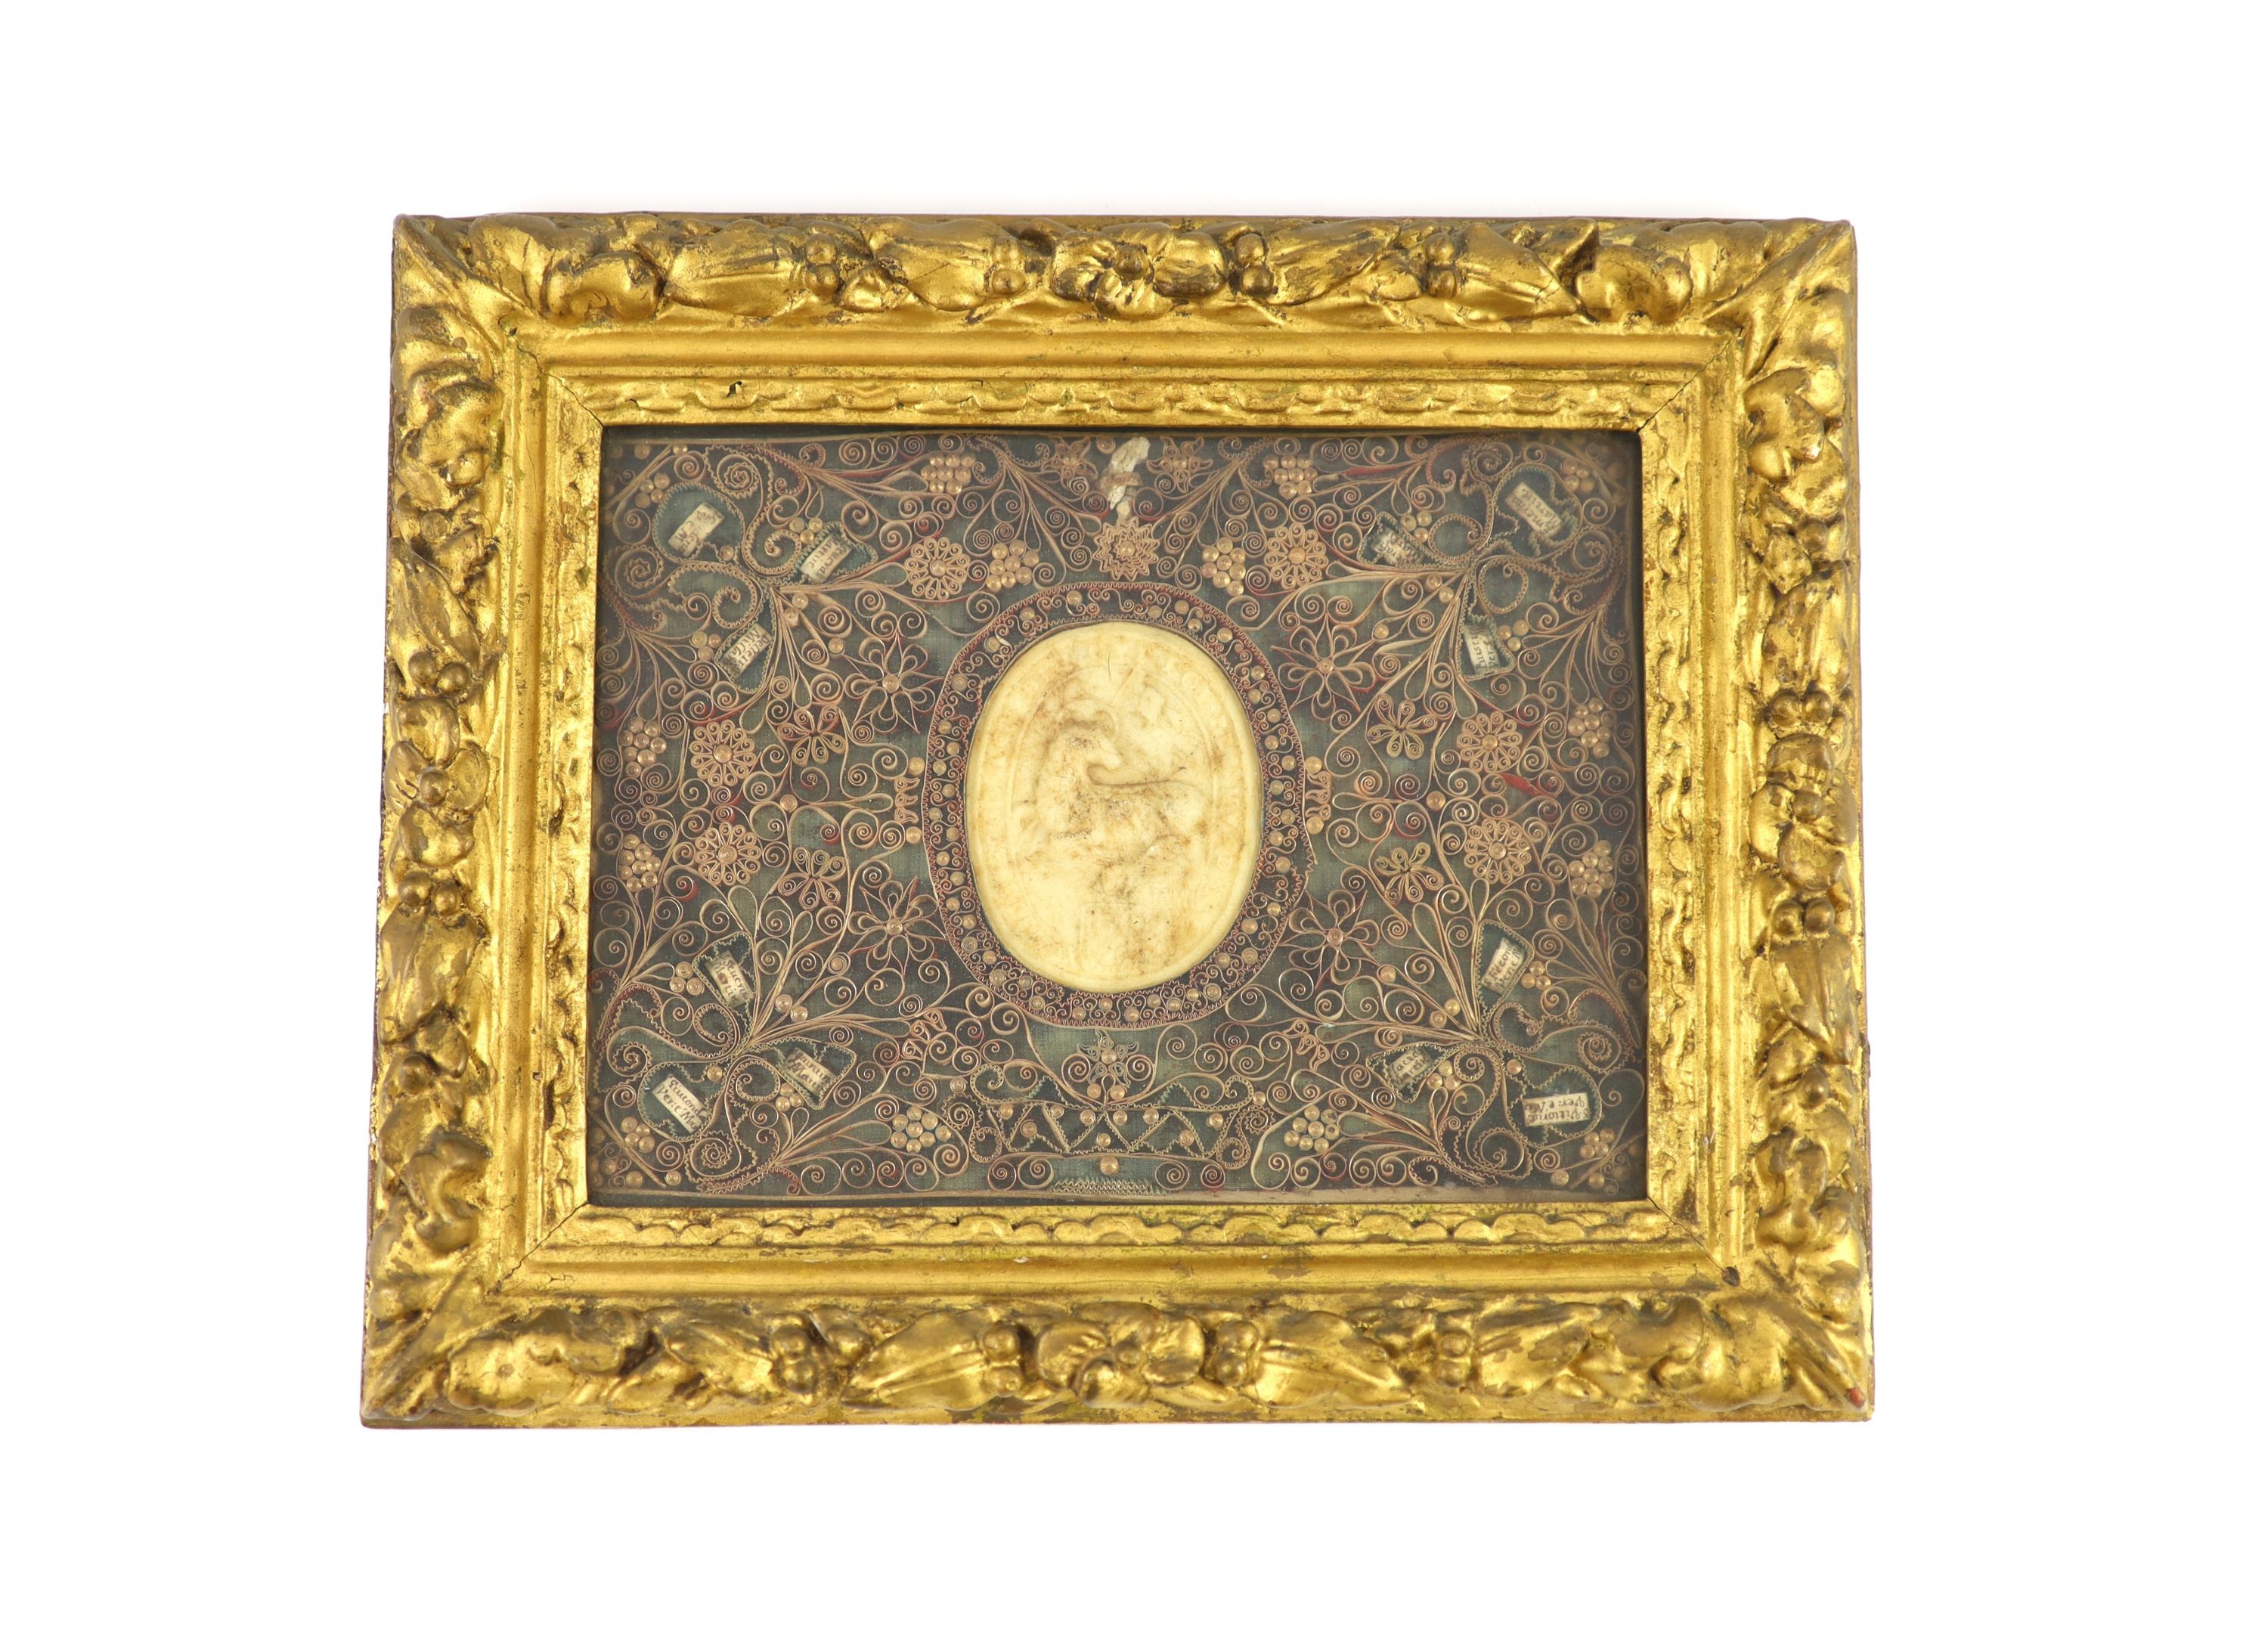 A 17th century wax papal seal seal impression 7.5 x 6cm, frame overall 25 x 30cm